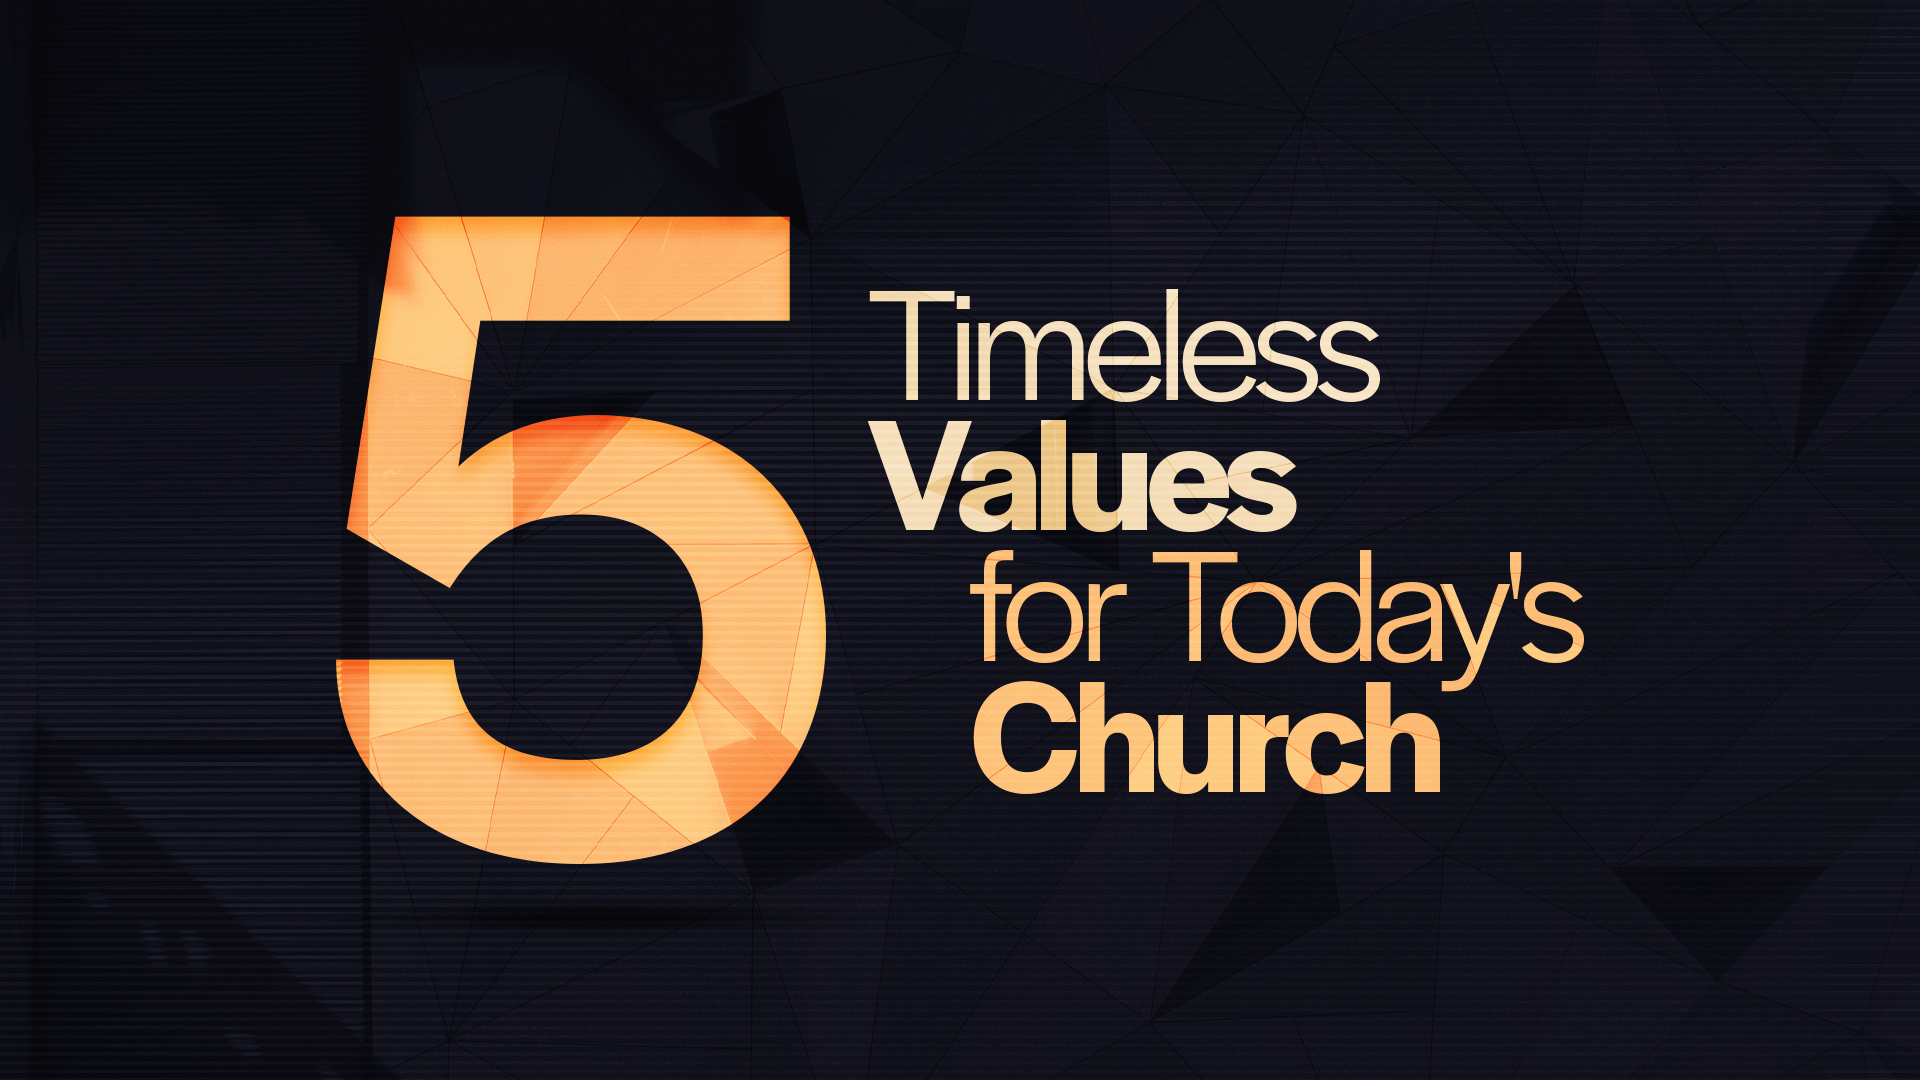 5 Timeless Values for Today's Church - Full Service